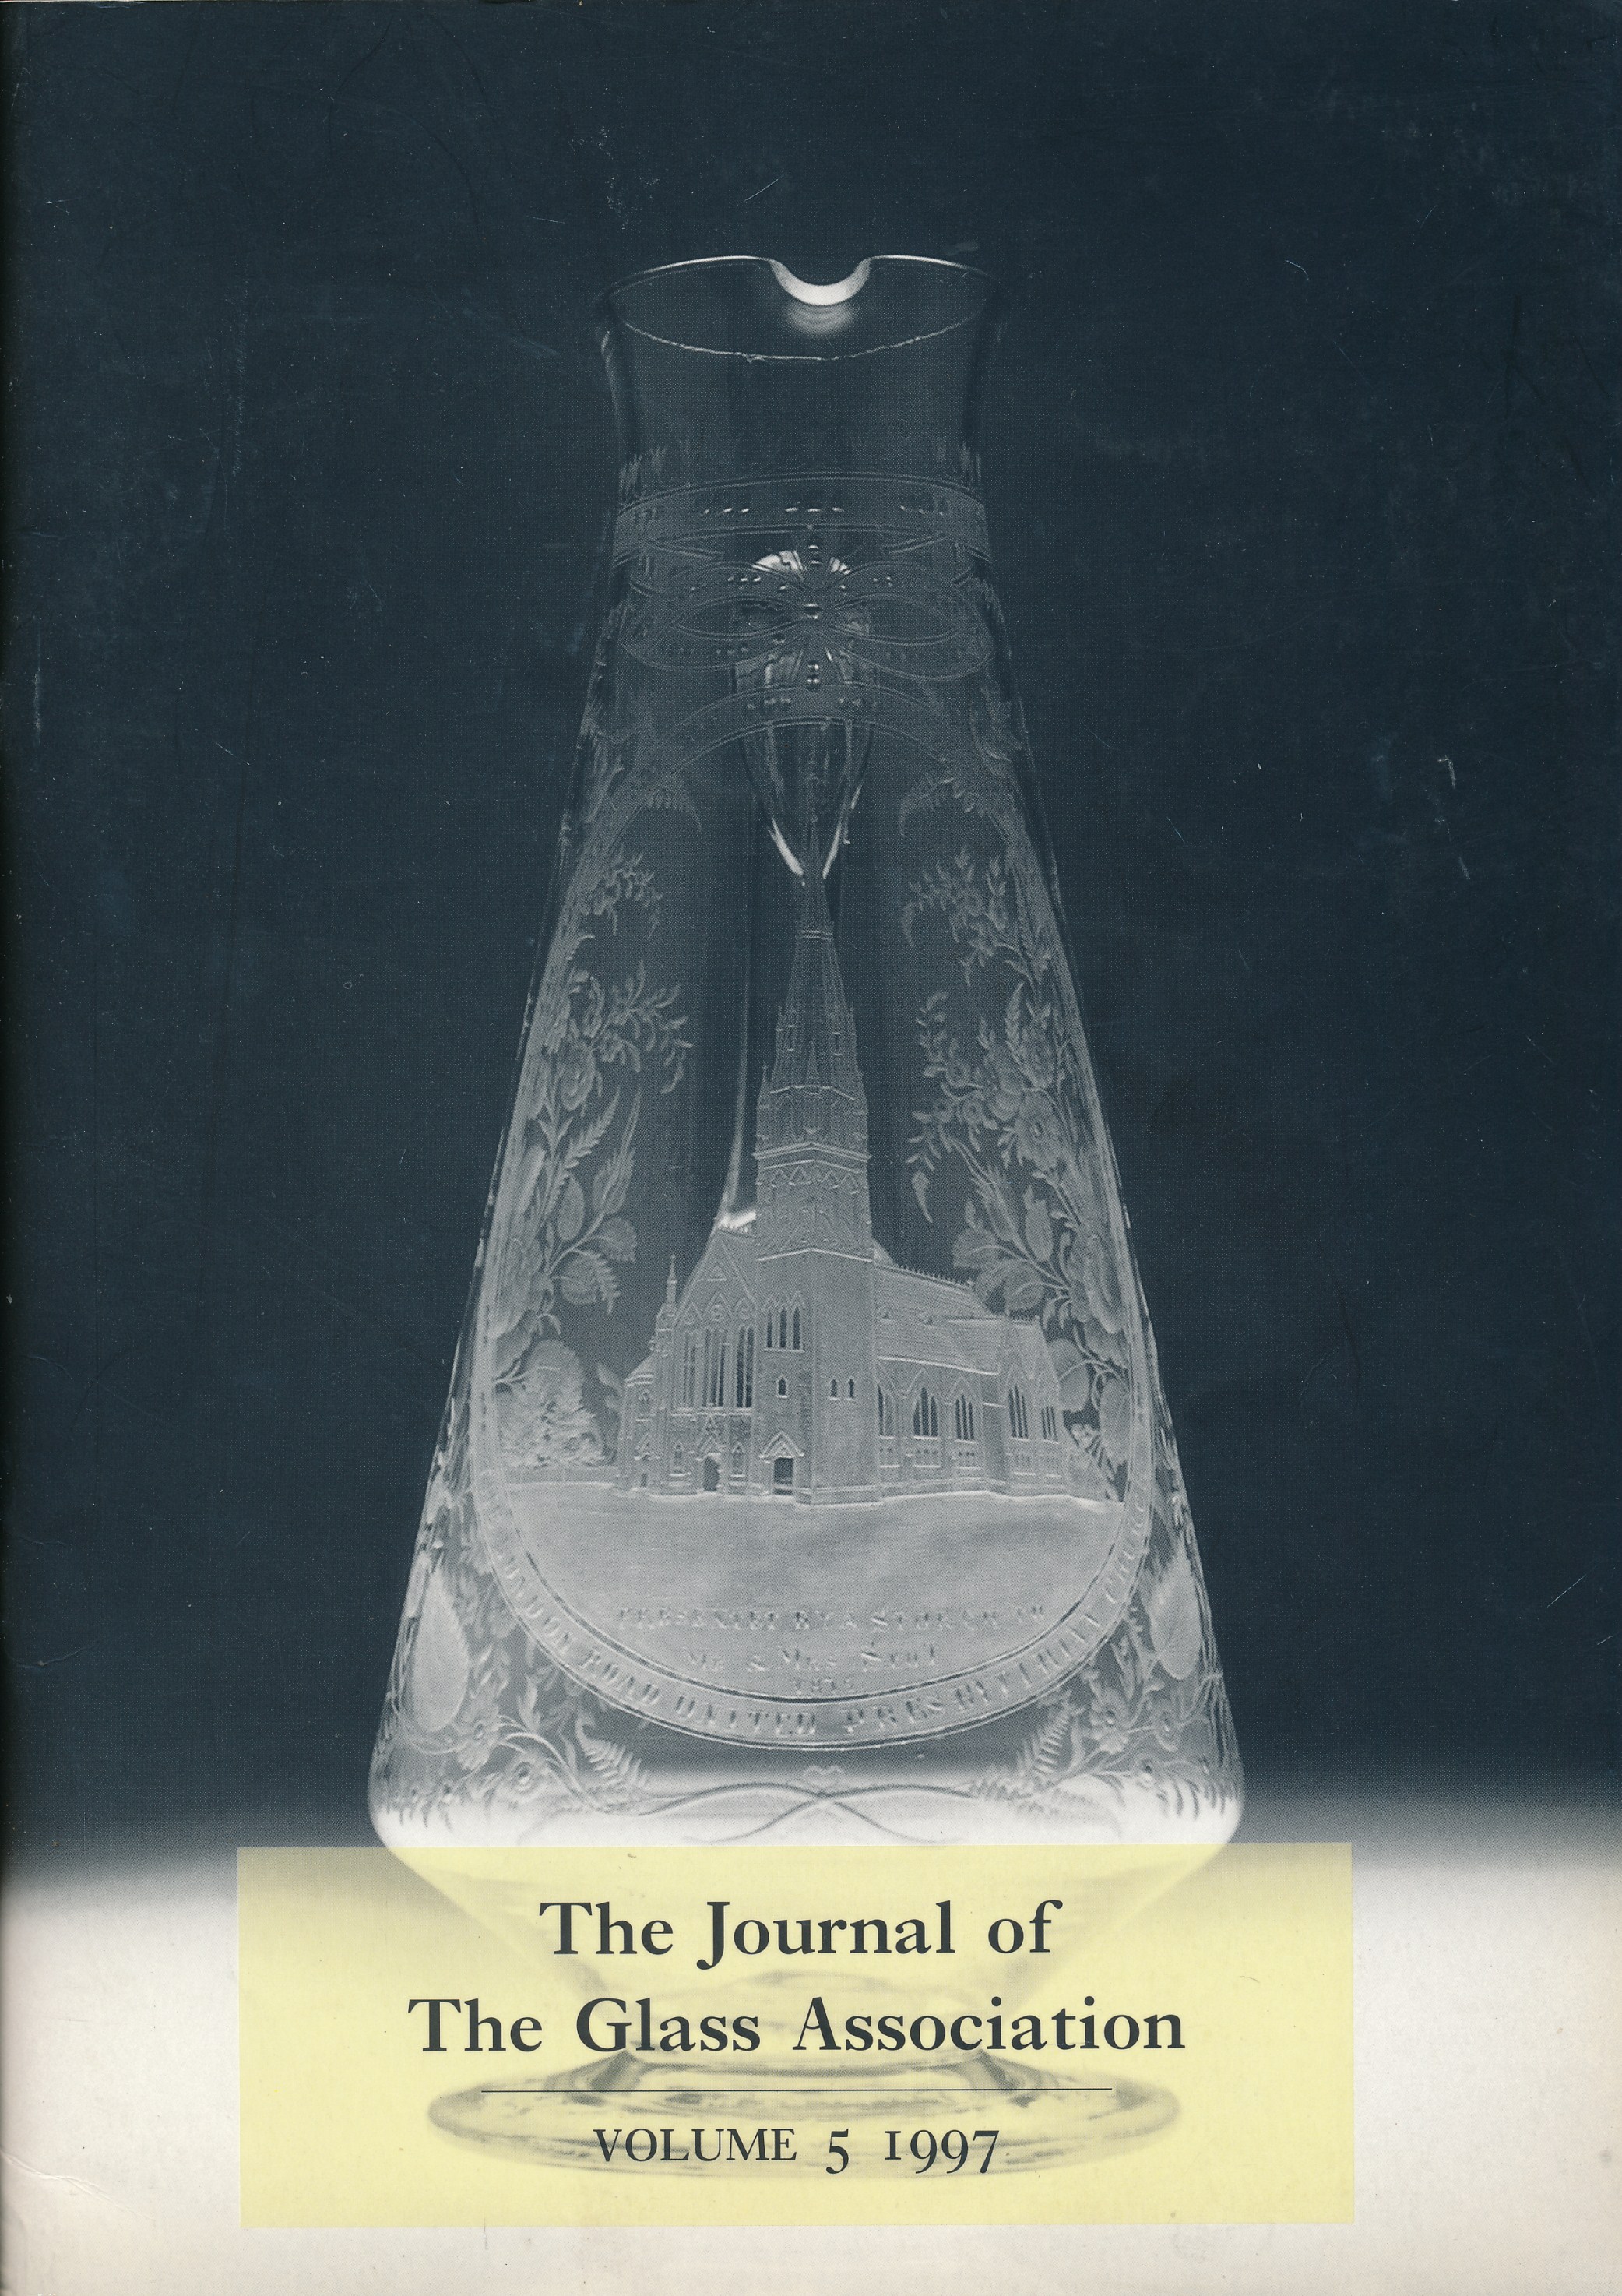 The Journal of the Glass Association. Volume 5. 1997